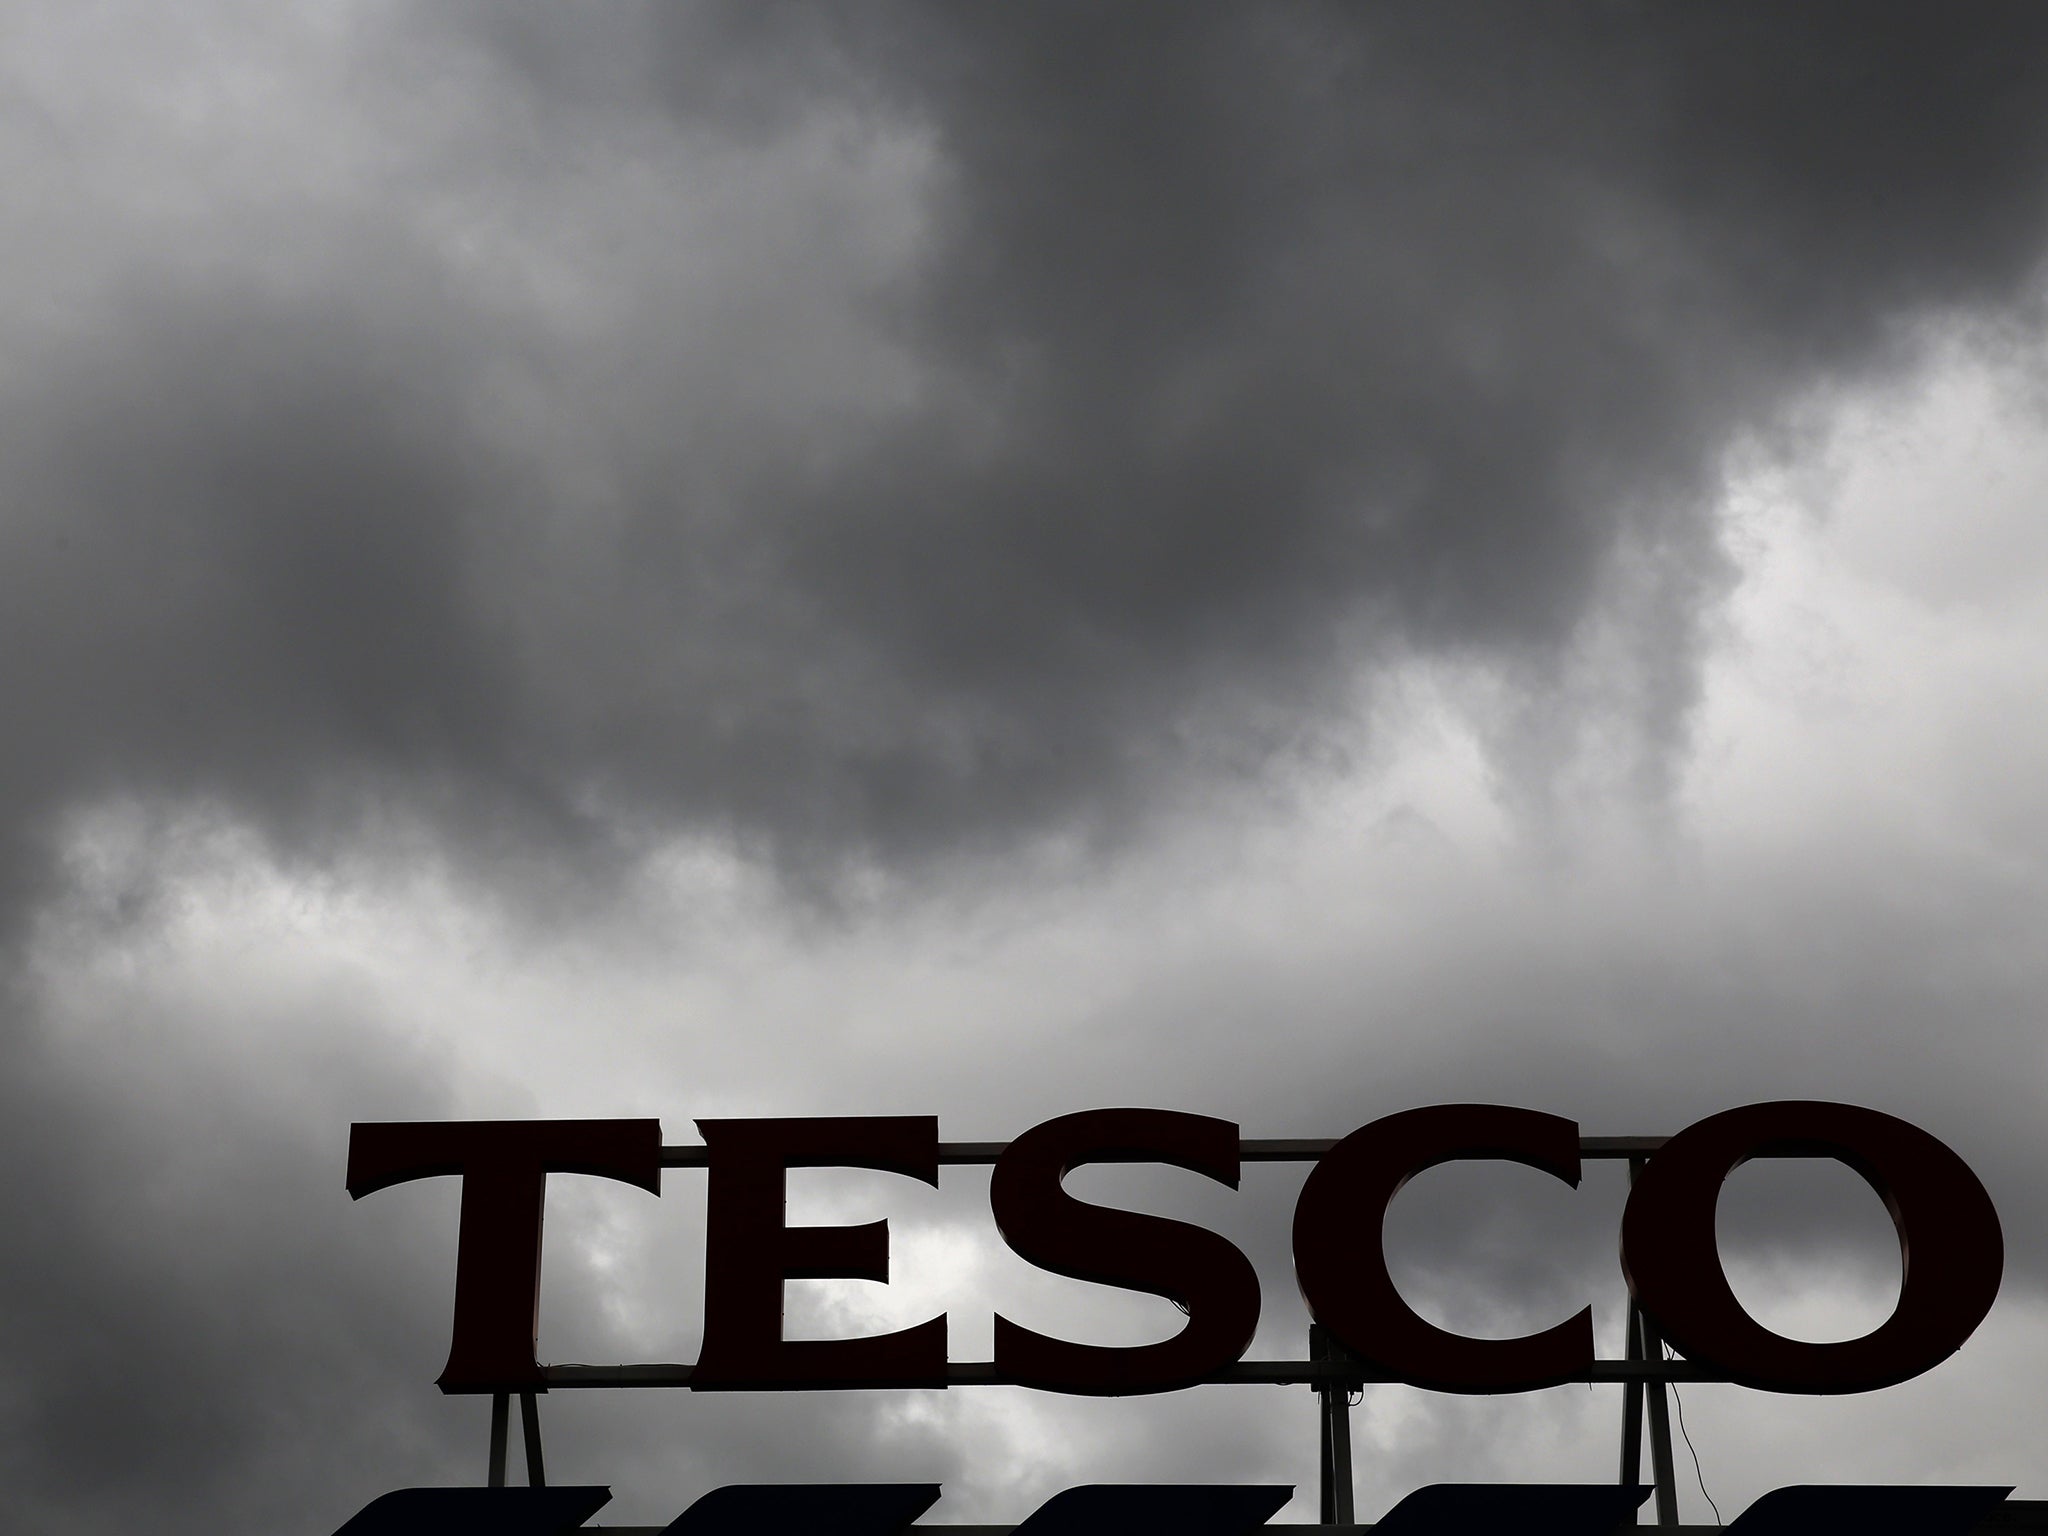 Tesco has selected a former chairman of Dixons for its new chairman, passing over favourite Archie Norman